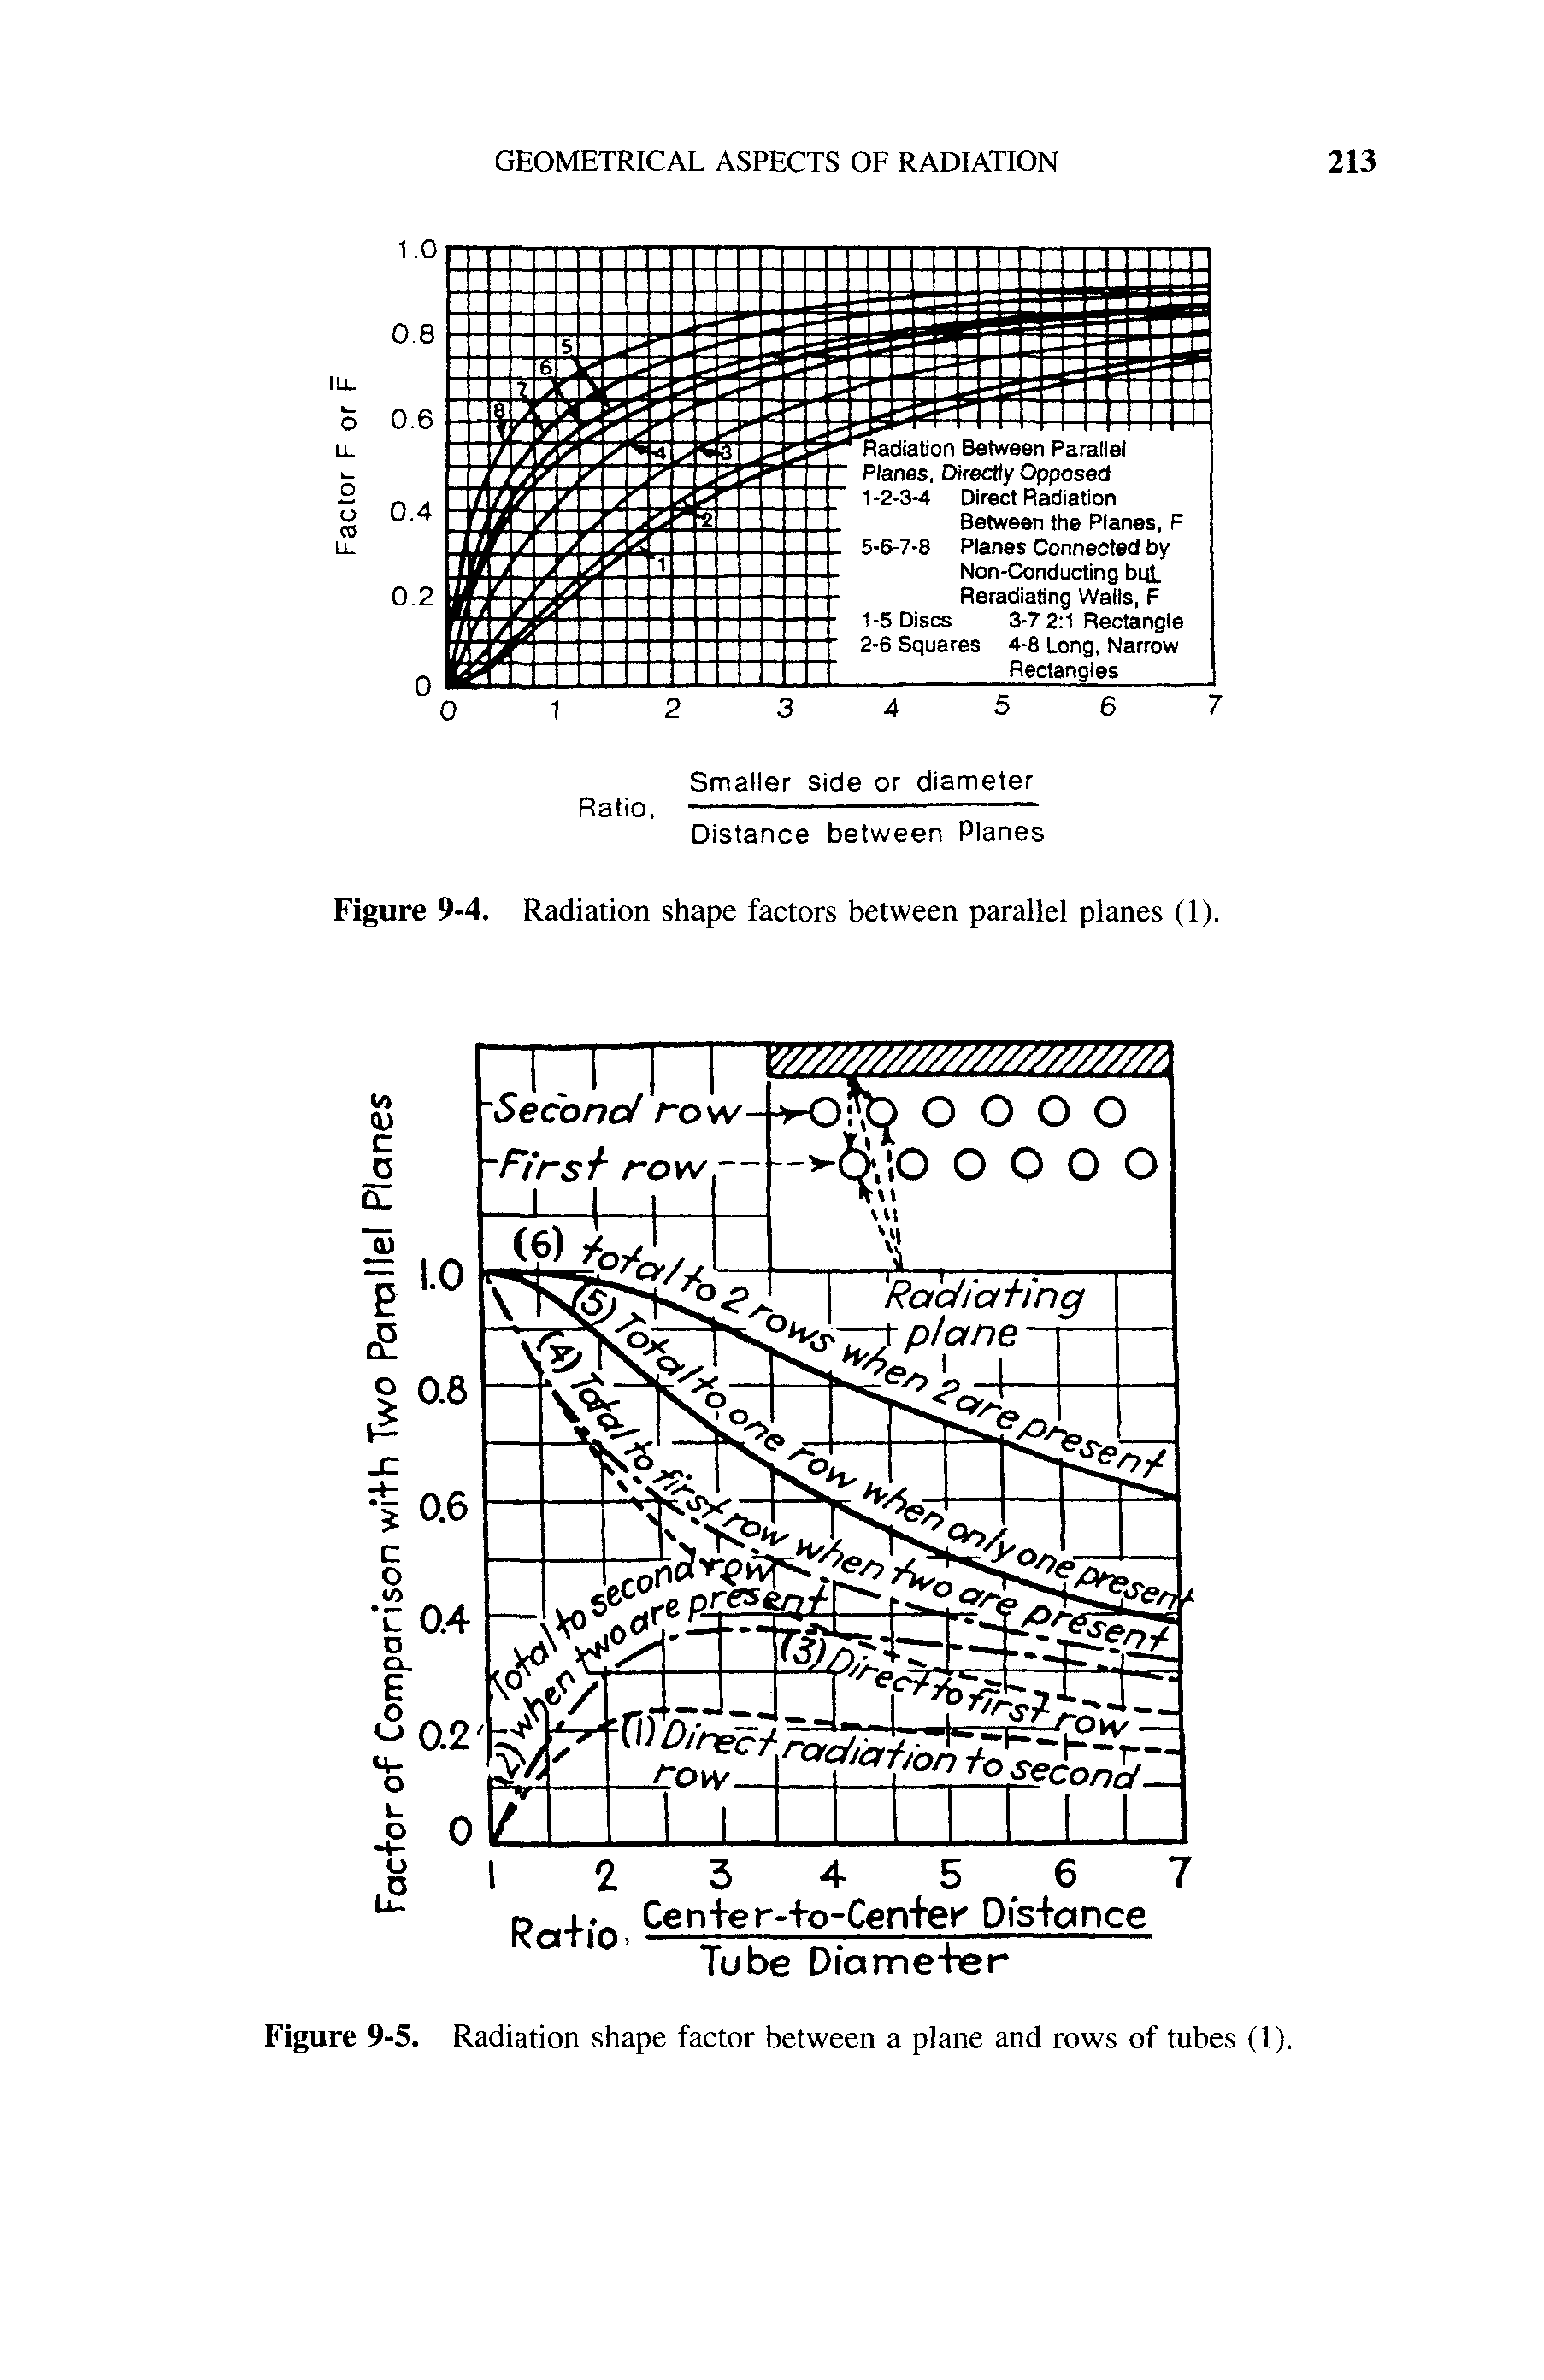 Figure 9-5. Radiation shape factor between a plane and rows of tubes (1).